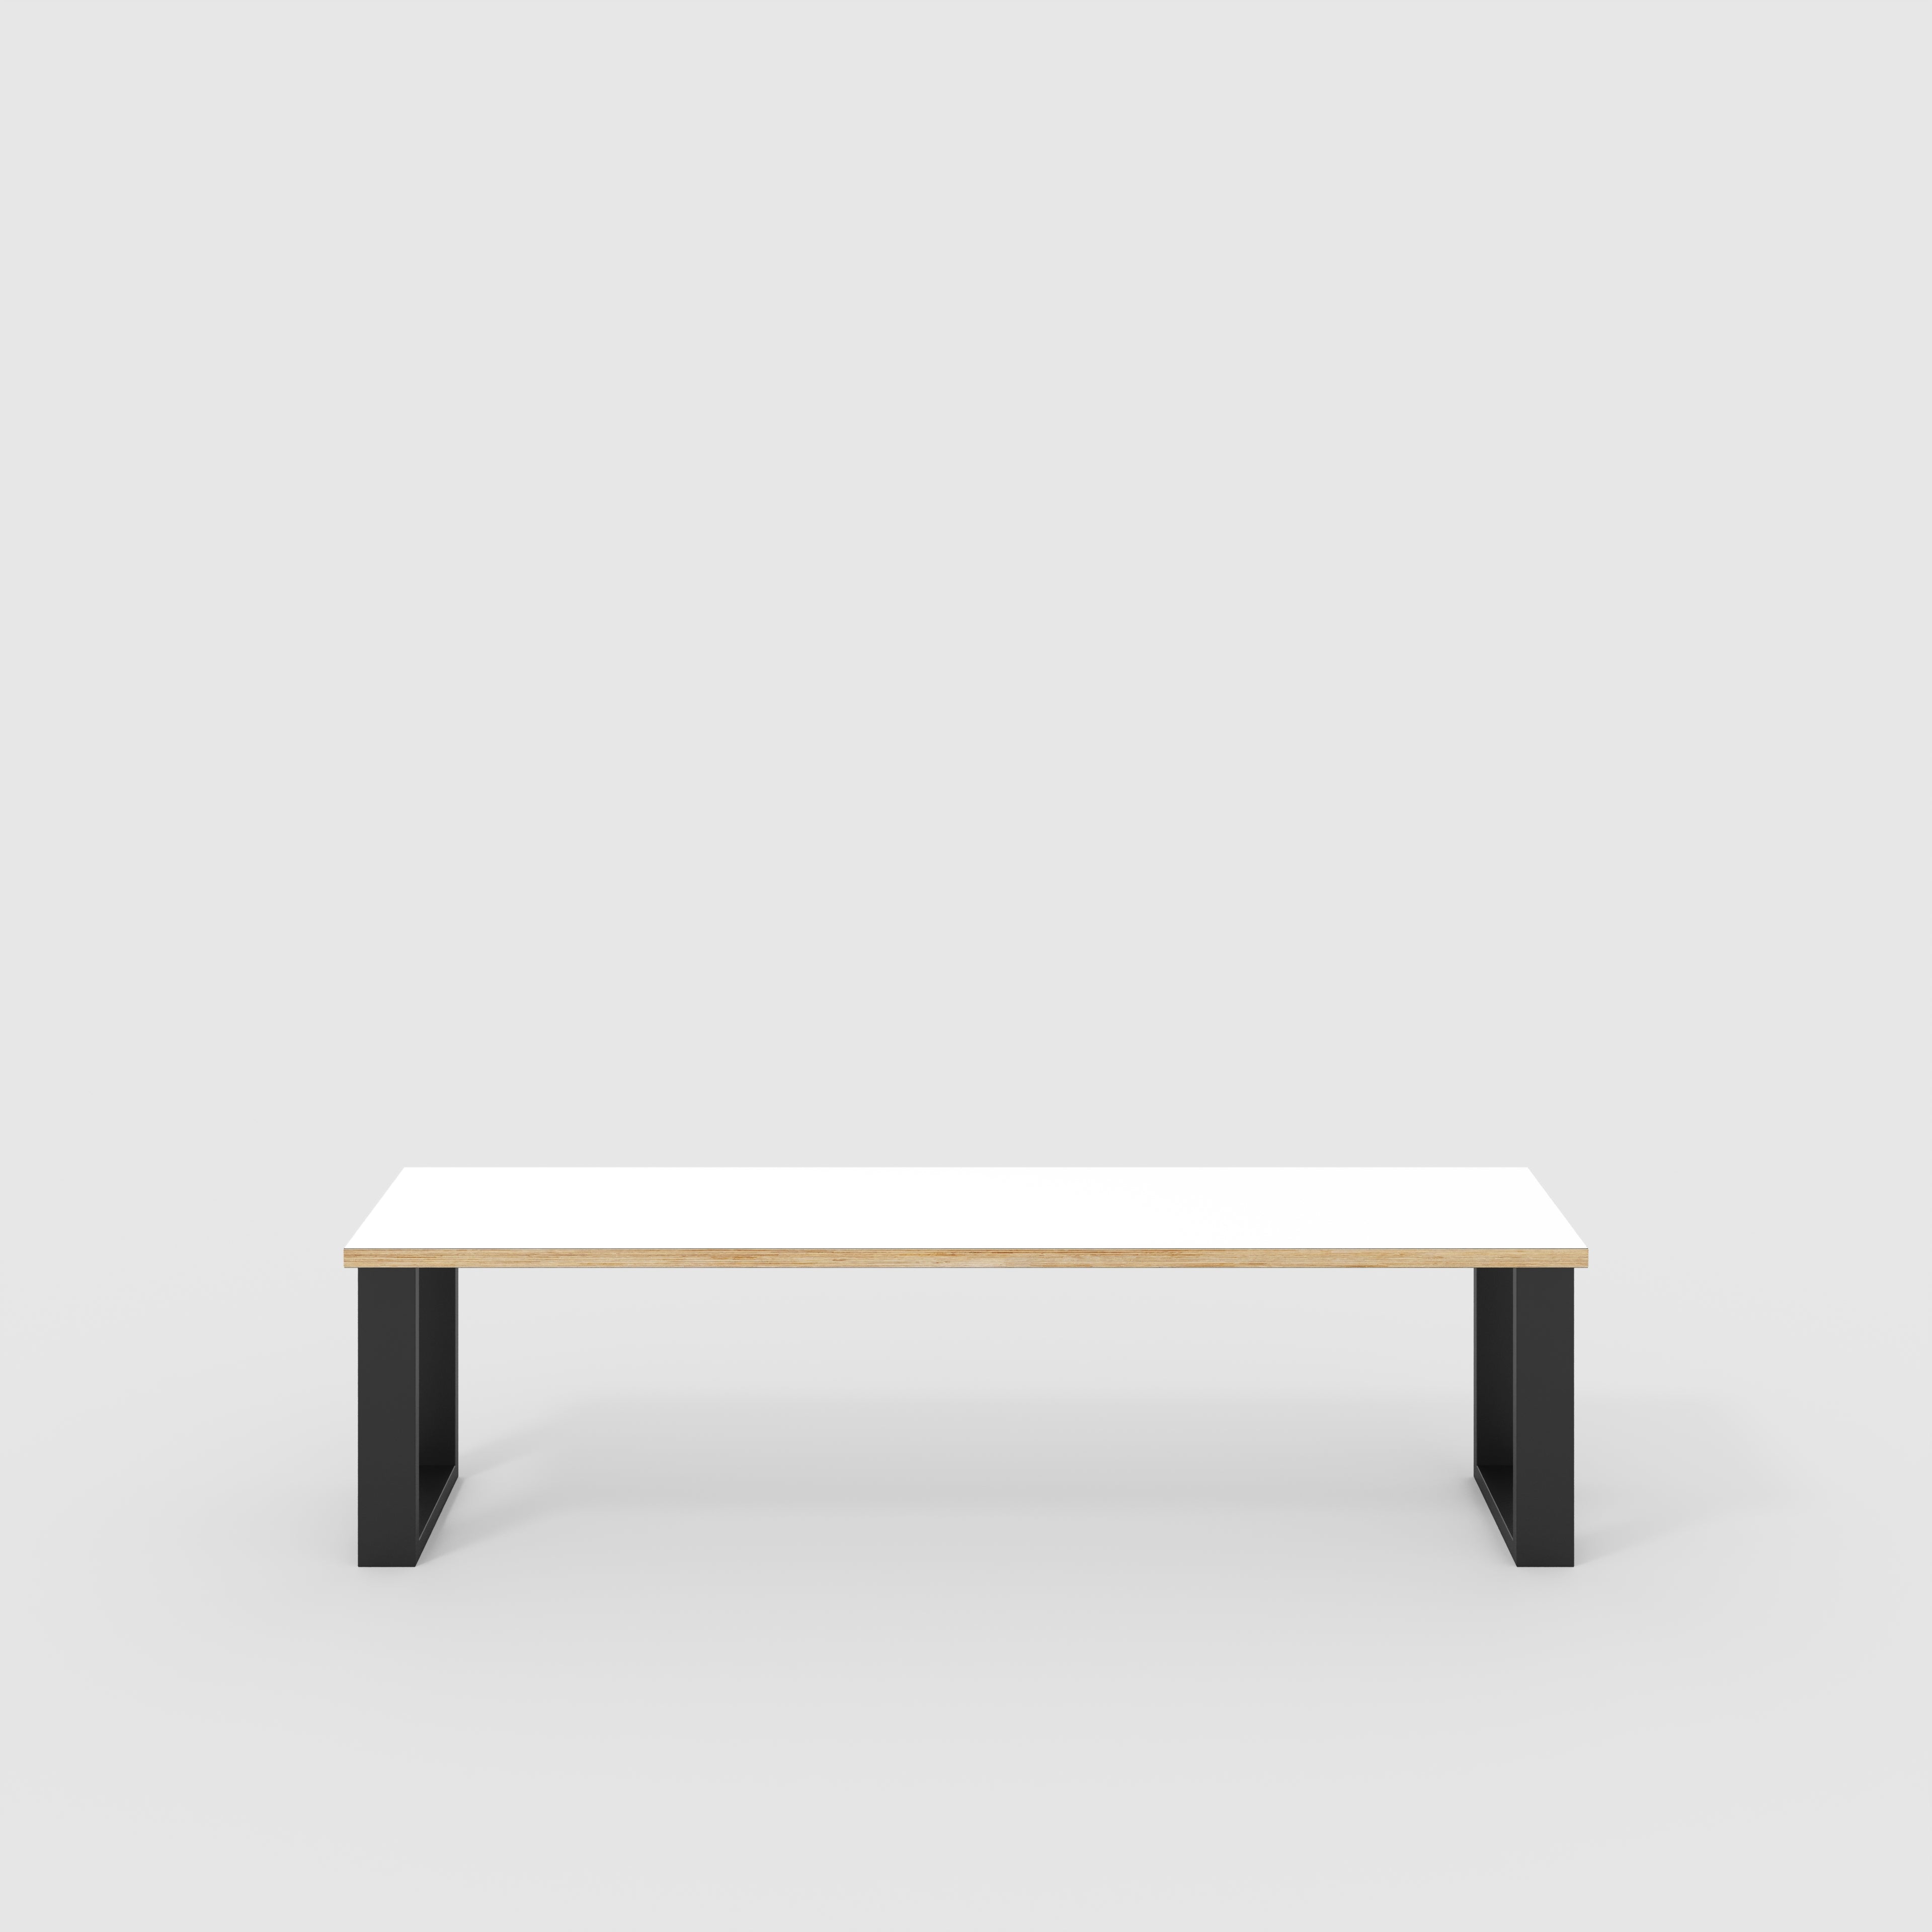 Bench Seat with Black Industrial Legs - Formica White - 1600(w) x 400(d)